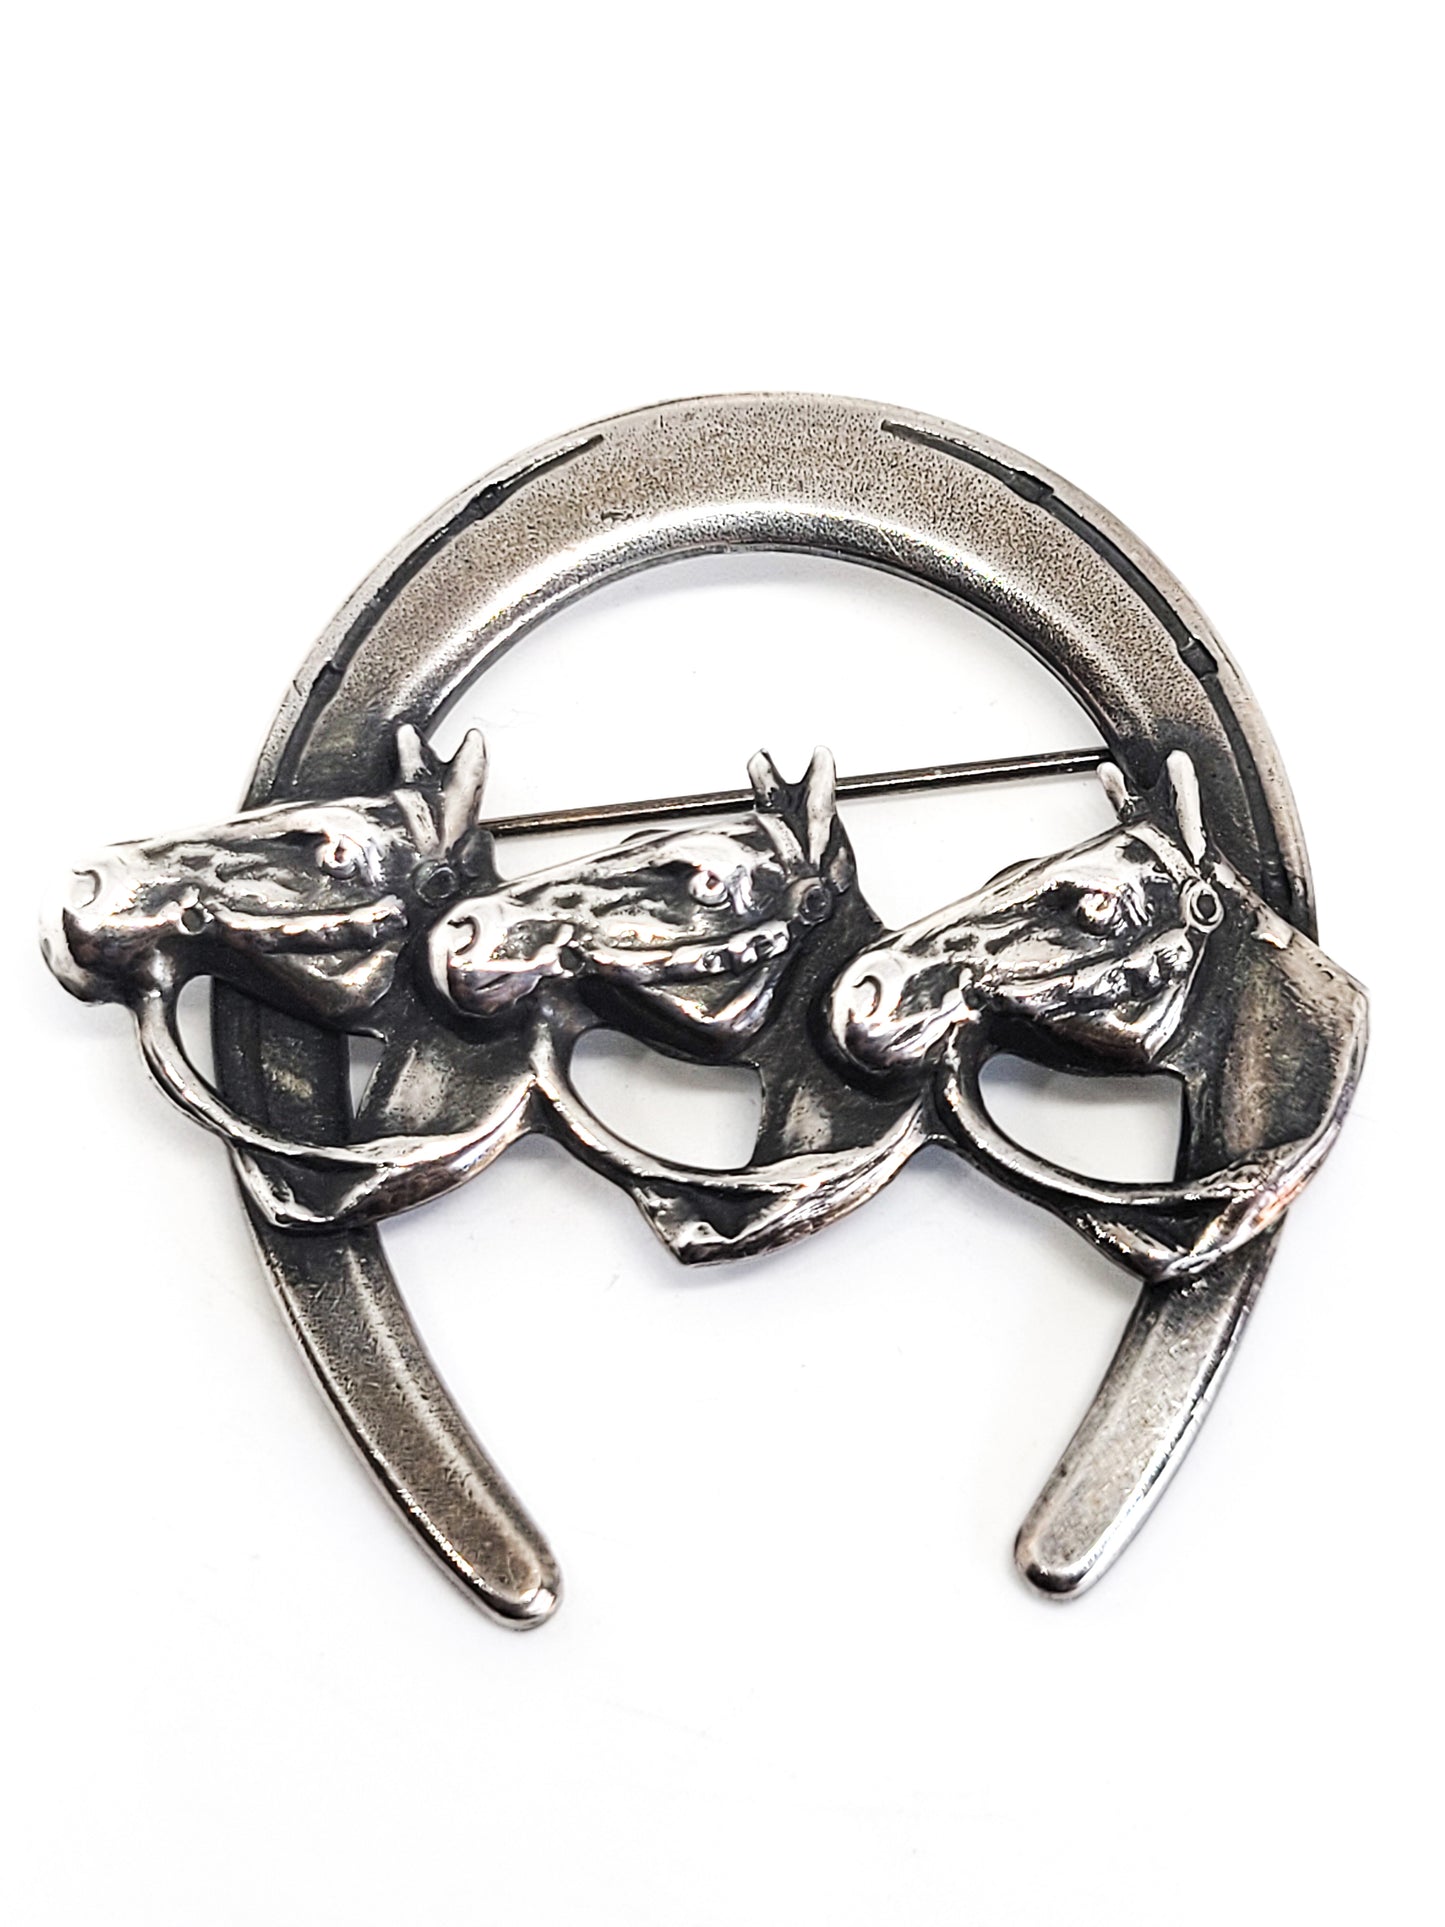 Equestrian triple horse bridle silver toned vintage horseshoe brooch pin